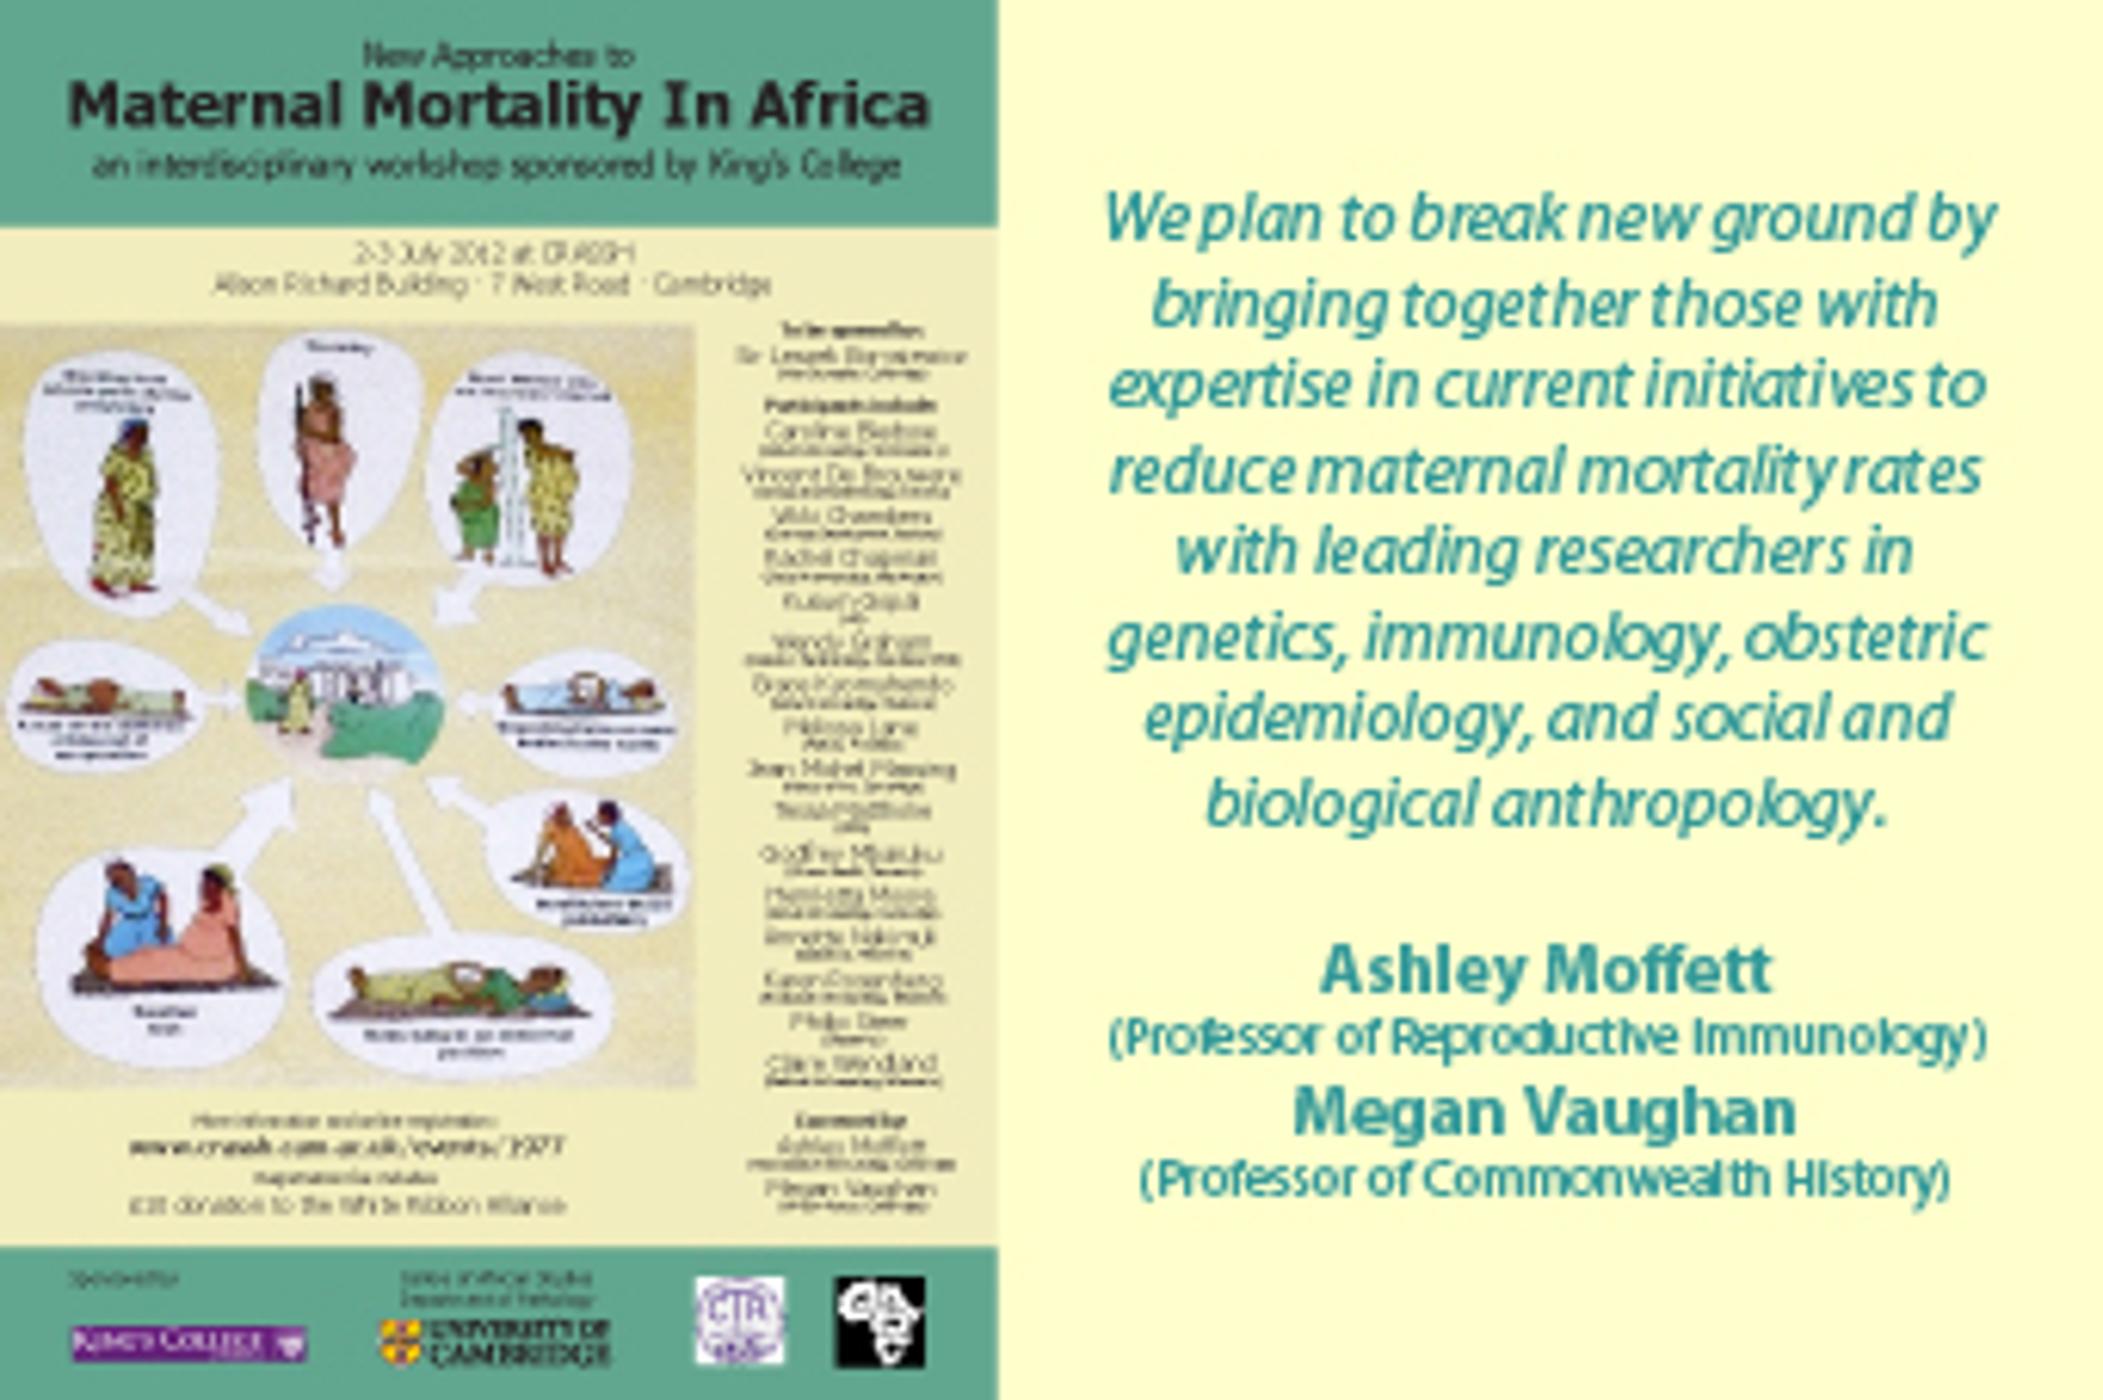 Ashley Moffett: New Approaches to Maternal Mortality In Africa